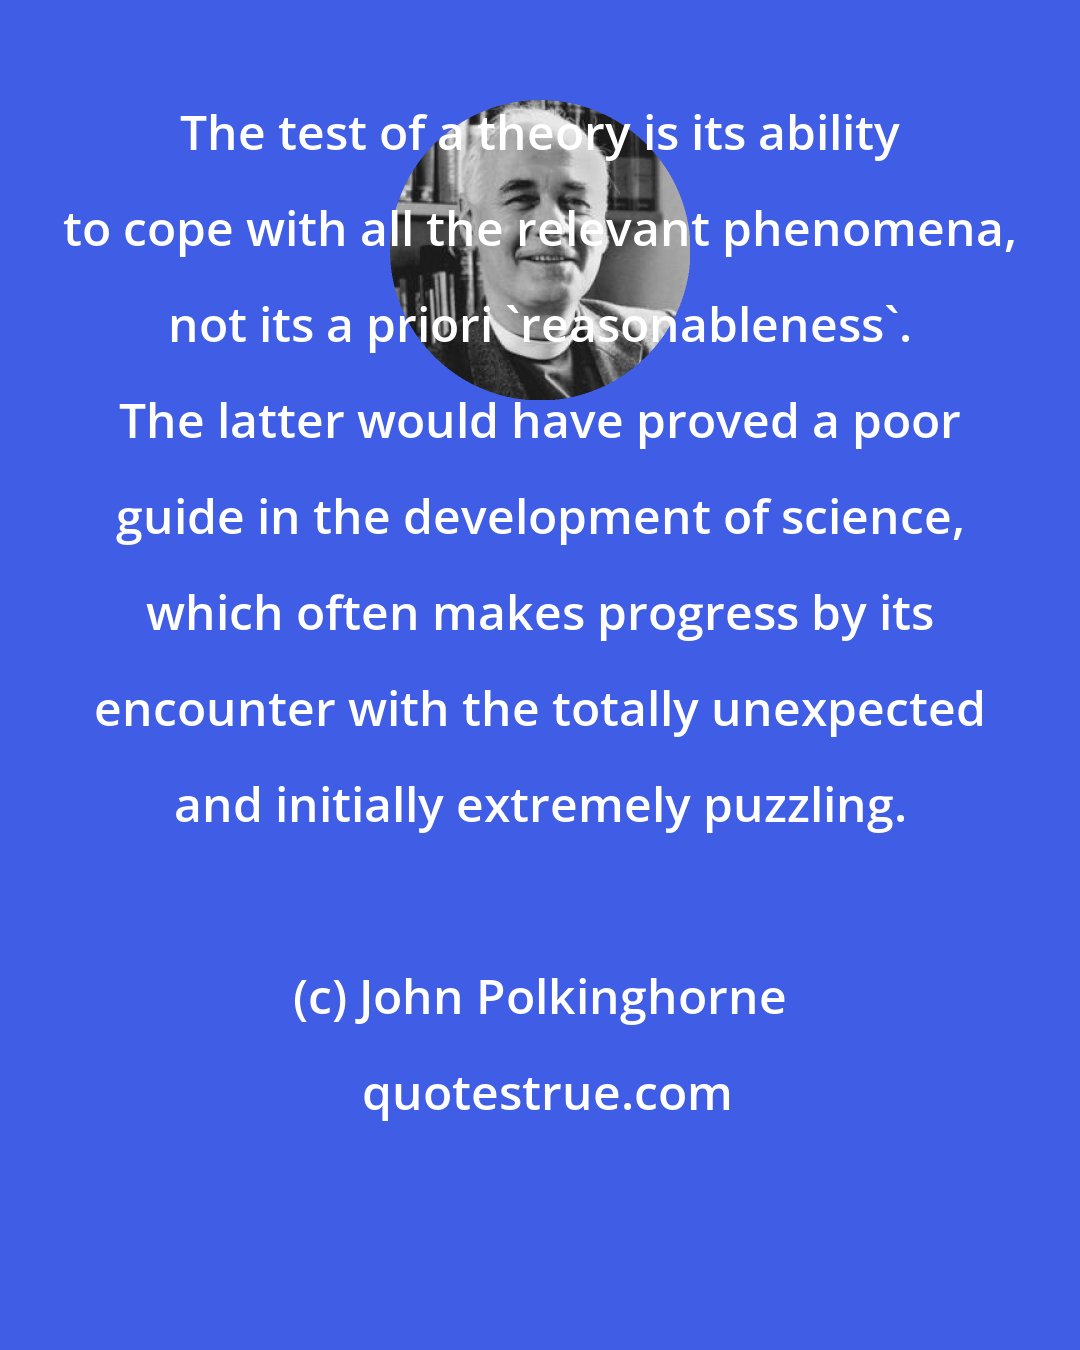 John Polkinghorne: The test of a theory is its ability to cope with all the relevant phenomena, not its a priori 'reasonableness'. The latter would have proved a poor guide in the development of science, which often makes progress by its encounter with the totally unexpected and initially extremely puzzling.